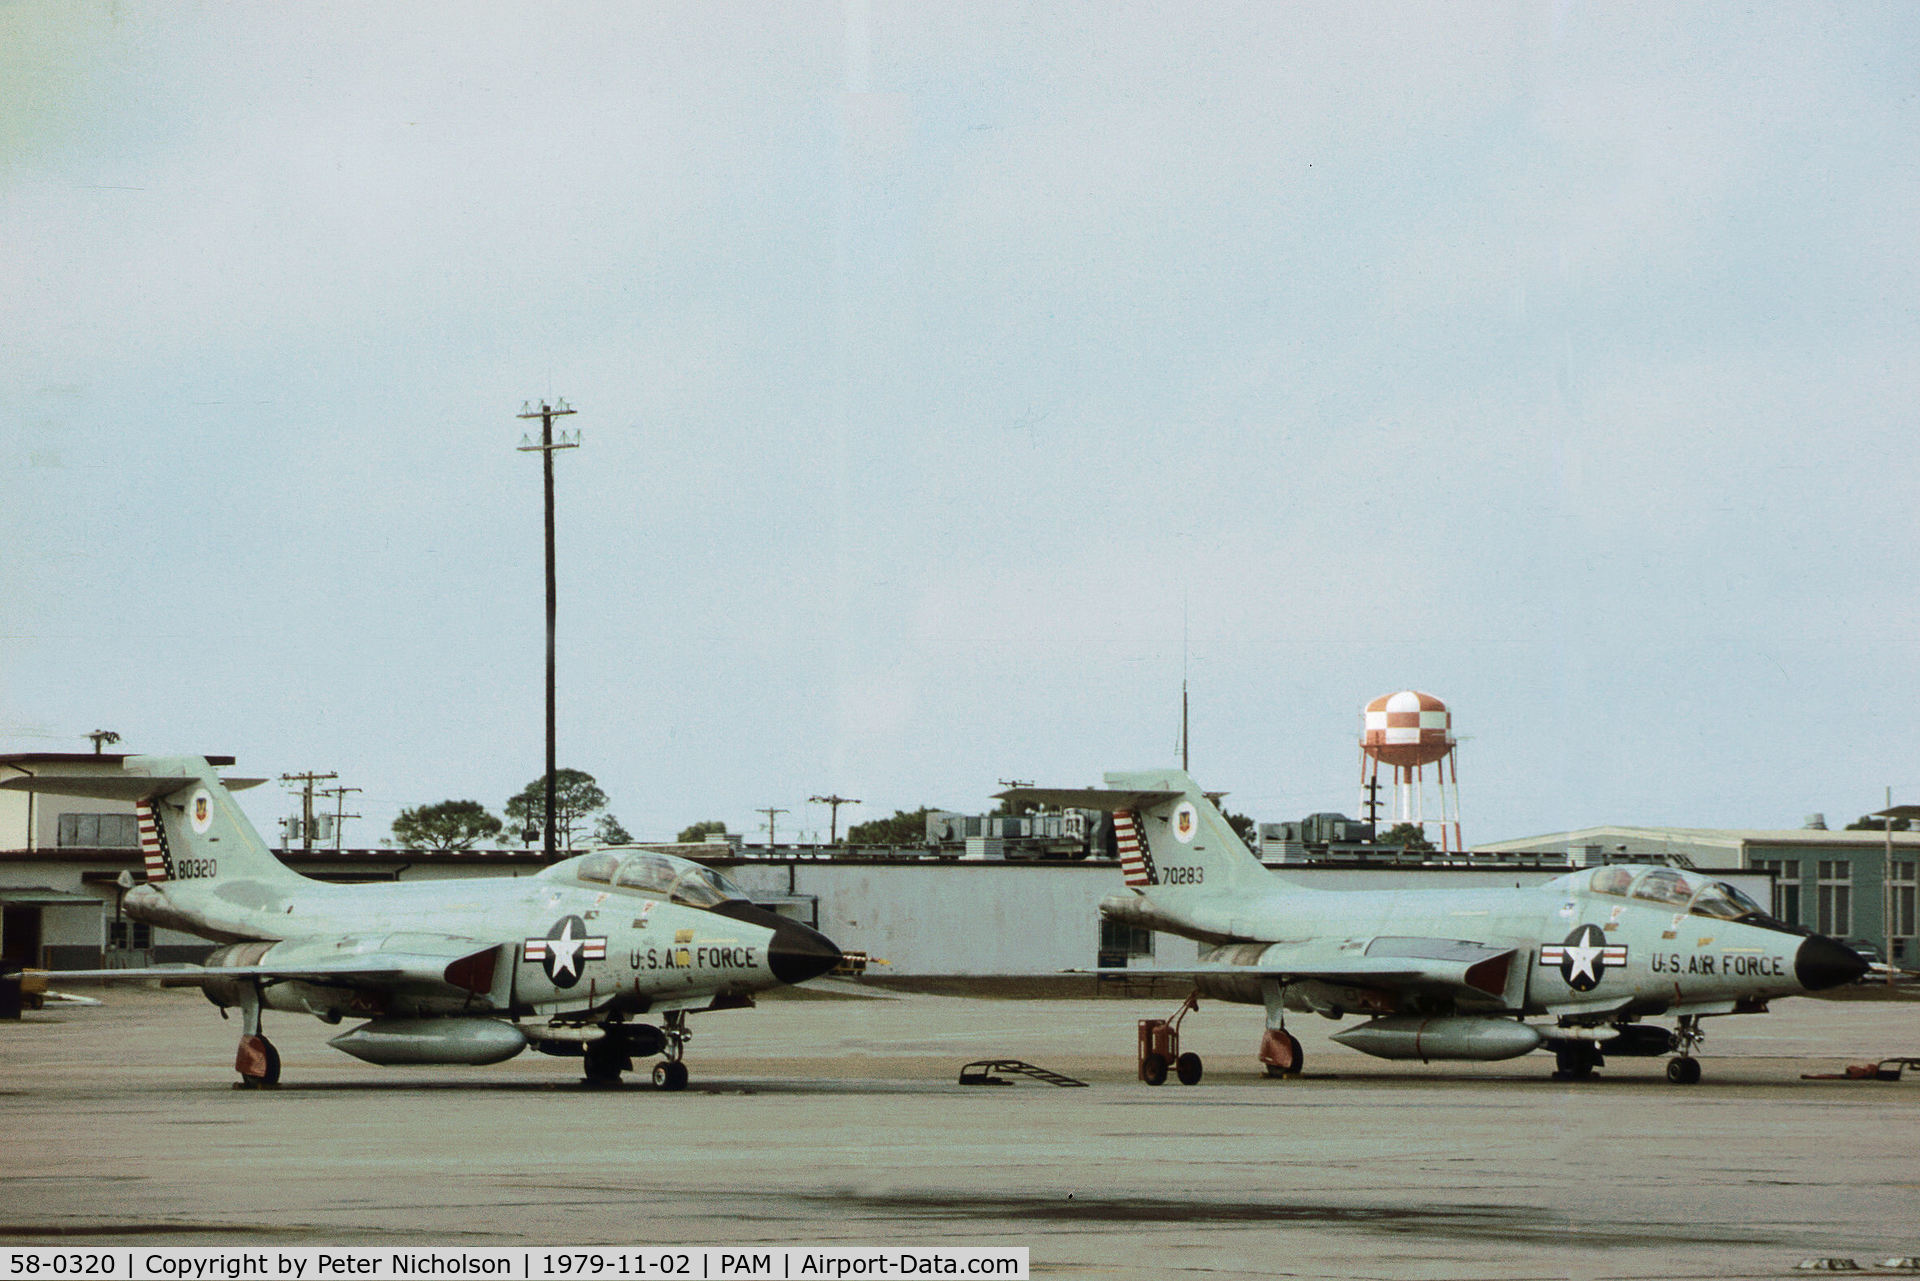 58-0320, 1958 McDonnell F-101B Voodoo C/N 692, F-101B Voodoo with companion 57-0283 at Tyndall AFB in November 1979.